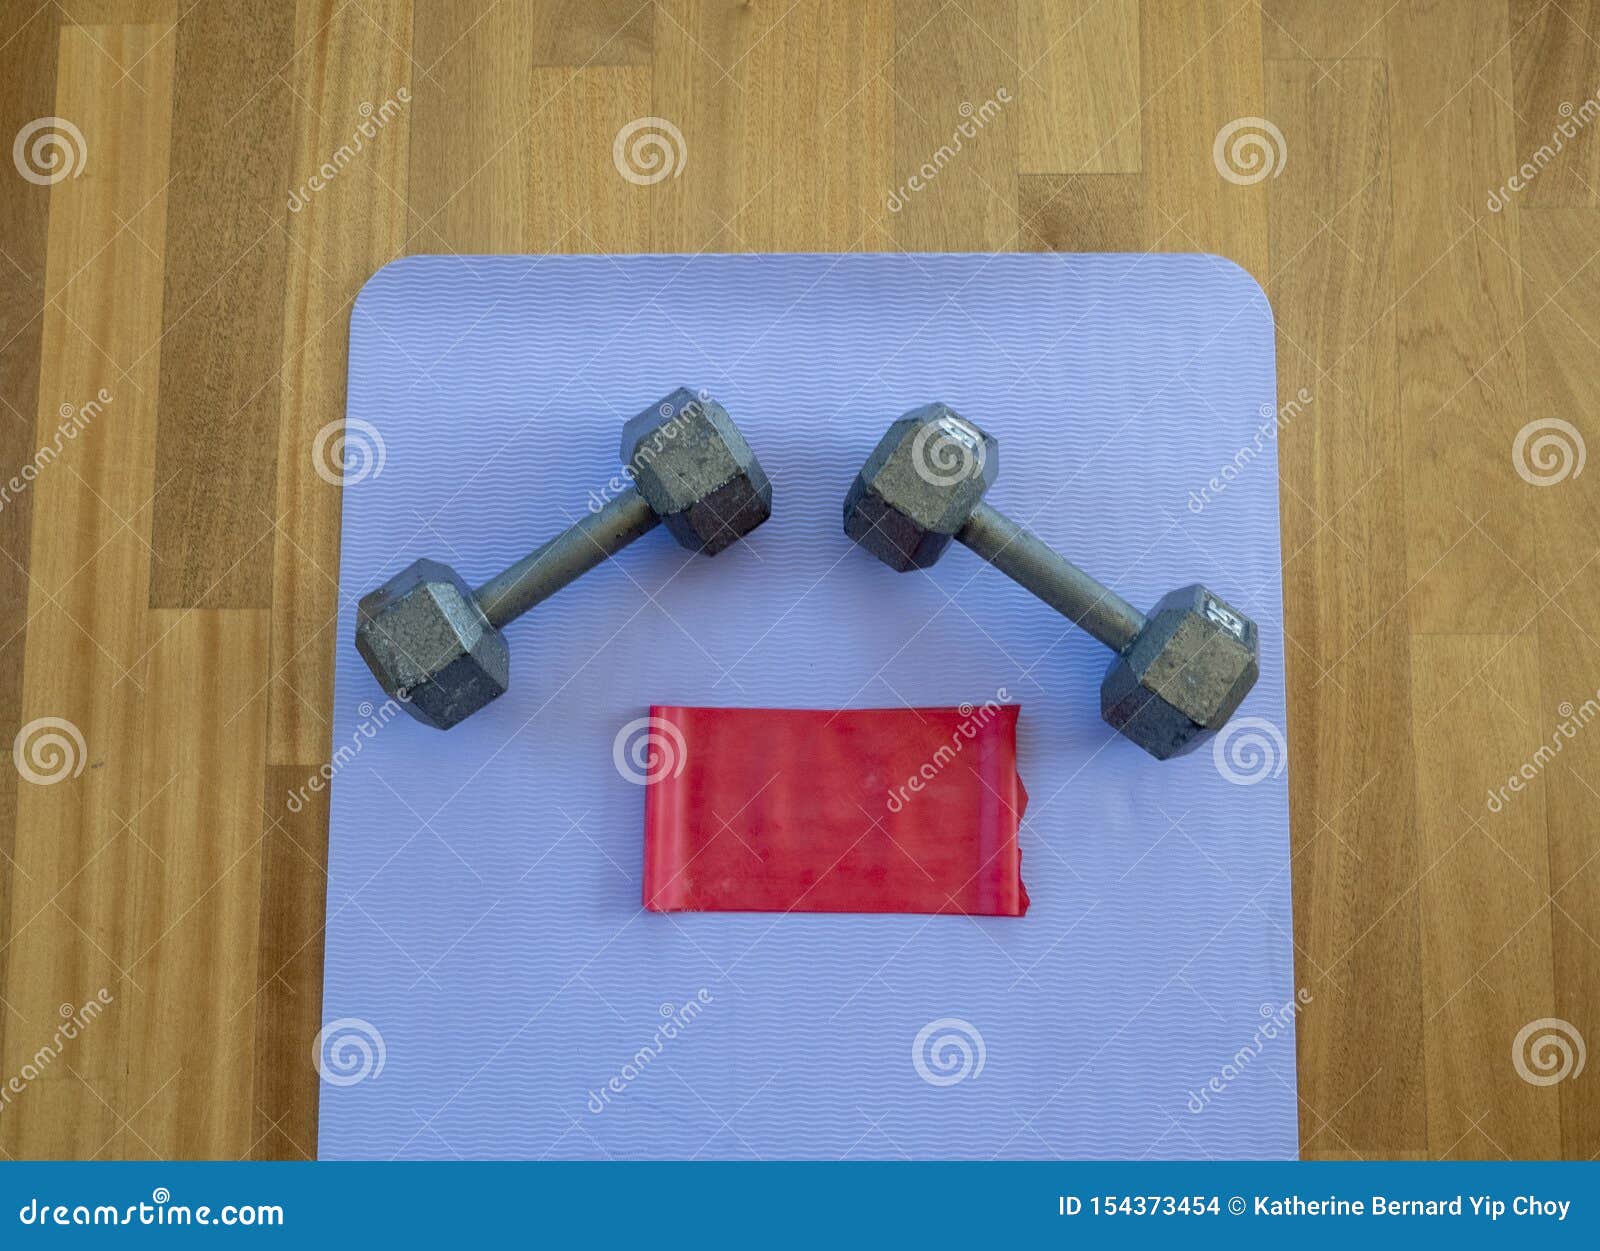 Dumbbells And Exercise Band On A Yoga Mat For A Home Workout Stock